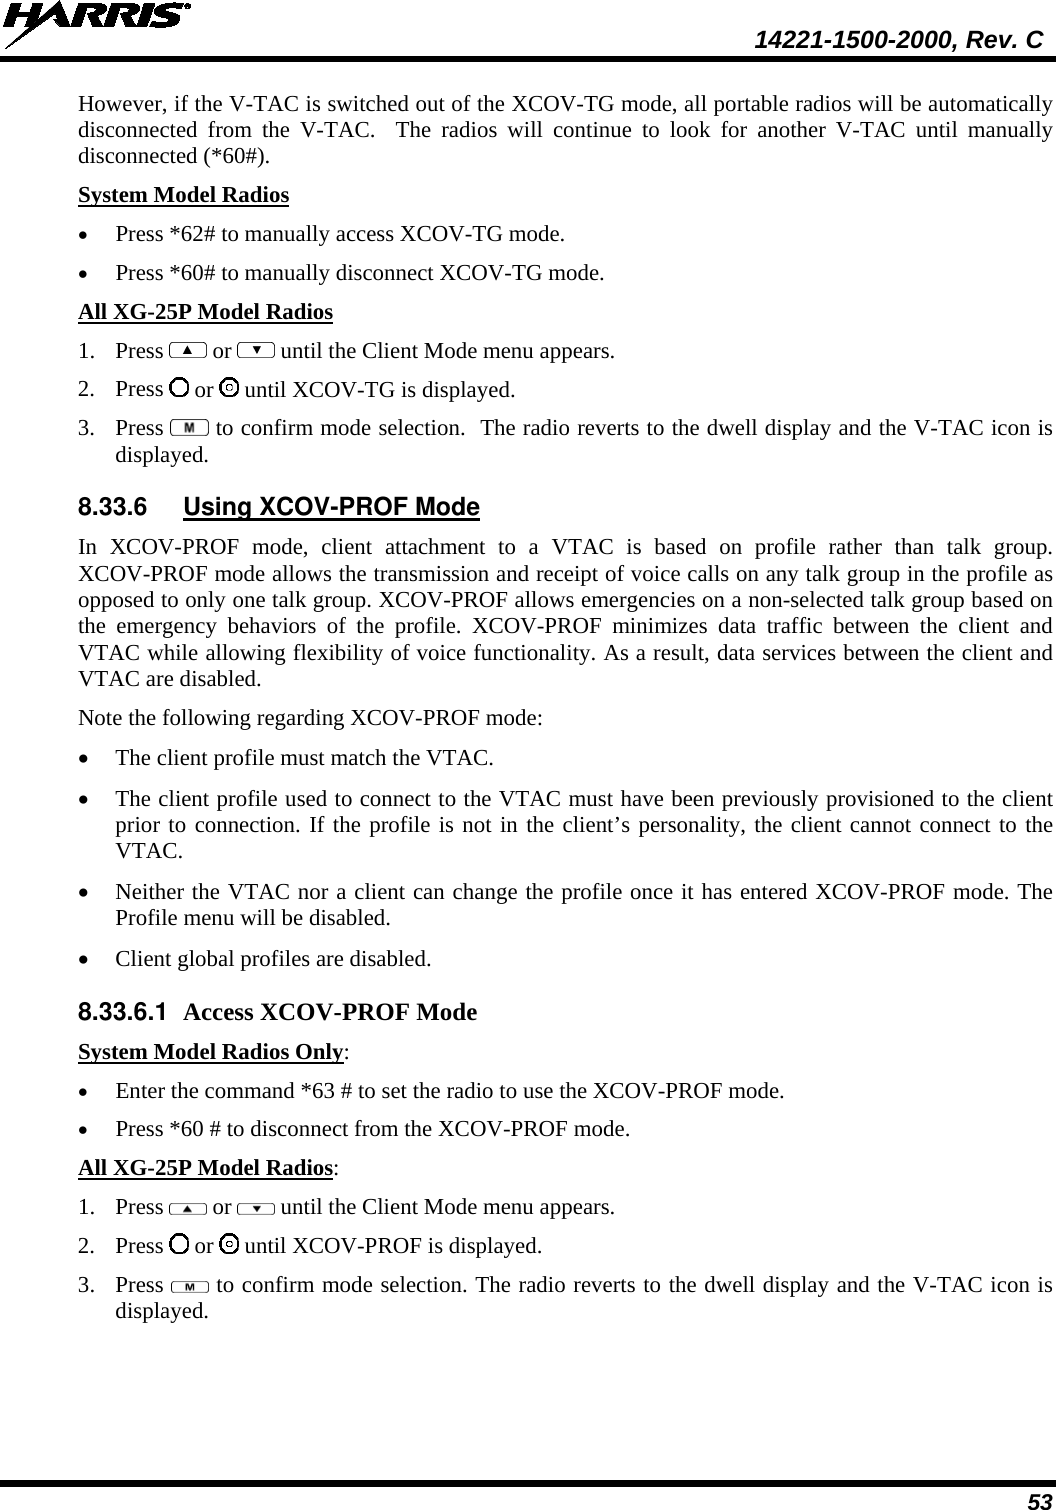  14221-1500-2000, Rev. C 53 However, if the V-TAC is switched out of the XCOV-TG mode, all portable radios will be automatically disconnected from the V-TAC.  The radios will continue to look for another V-TAC until manually disconnected (*60#).  System Model Radios • Press *62# to manually access XCOV-TG mode.  • Press *60# to manually disconnect XCOV-TG mode. All XG-25P Model Radios 1. Press   or   until the Client Mode menu appears. 2. Press   or   until XCOV-TG is displayed. 3. Press   to confirm mode selection.  The radio reverts to the dwell display and the V-TAC icon is displayed. 8.33.6 Using XCOV-PROF Mode In XCOV-PROF mode, client attachment to a VTAC is based on profile rather than talk group. XCOV-PROF mode allows the transmission and receipt of voice calls on any talk group in the profile as opposed to only one talk group. XCOV-PROF allows emergencies on a non-selected talk group based on the emergency behaviors of the profile. XCOV-PROF minimizes data traffic between the client and VTAC while allowing flexibility of voice functionality. As a result, data services between the client and VTAC are disabled. Note the following regarding XCOV-PROF mode: • The client profile must match the VTAC.  • The client profile used to connect to the VTAC must have been previously provisioned to the client prior to connection. If the profile is not in the client’s personality, the client cannot connect to the VTAC. • Neither the VTAC nor a client can change the profile once it has entered XCOV-PROF mode. The Profile menu will be disabled. • Client global profiles are disabled. 8.33.6.1 Access XCOV-PROF Mode System Model Radios Only: • Enter the command *63 # to set the radio to use the XCOV-PROF mode. • Press *60 # to disconnect from the XCOV-PROF mode. All XG-25P Model Radios: 1. Press   or   until the Client Mode menu appears. 2. Press   or   until XCOV-PROF is displayed. 3. Press   to confirm mode selection. The radio reverts to the dwell display and the V-TAC icon is displayed. 